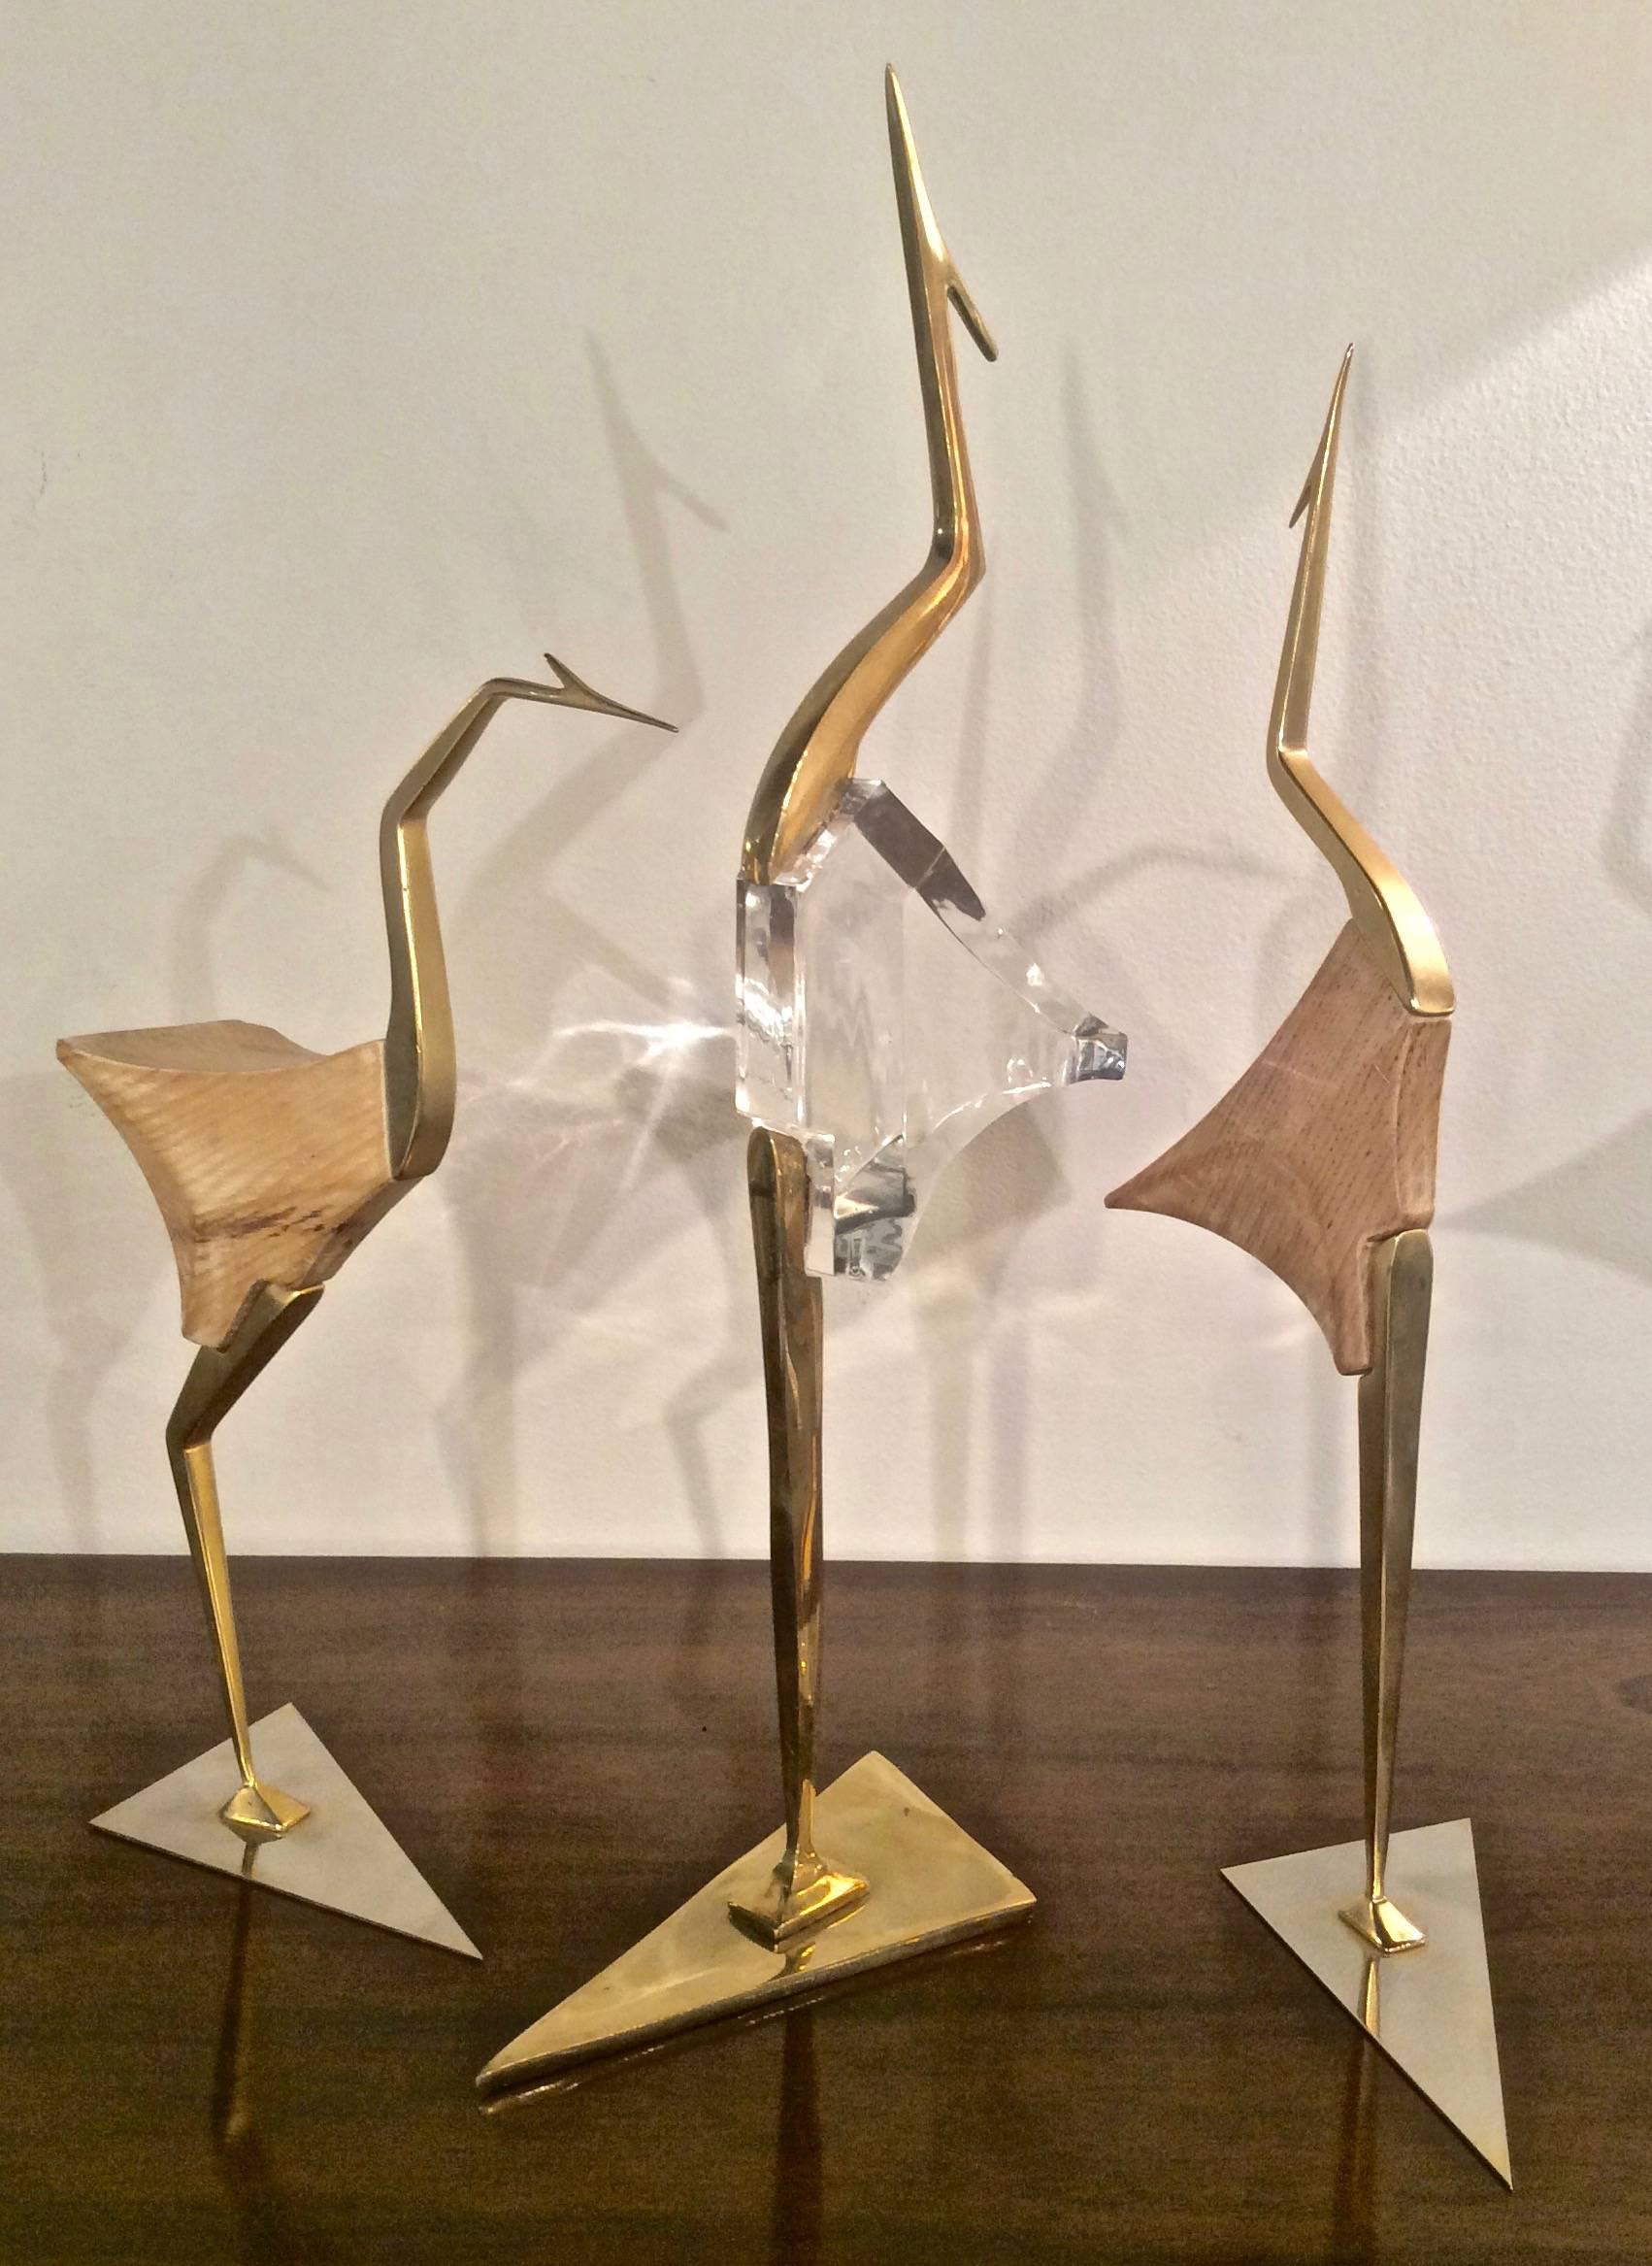 Three modernist egrets or cranes, two in brass with wood block bodies and the third larger on from brass and Lucite.

Wood crane looking up: H 17.5